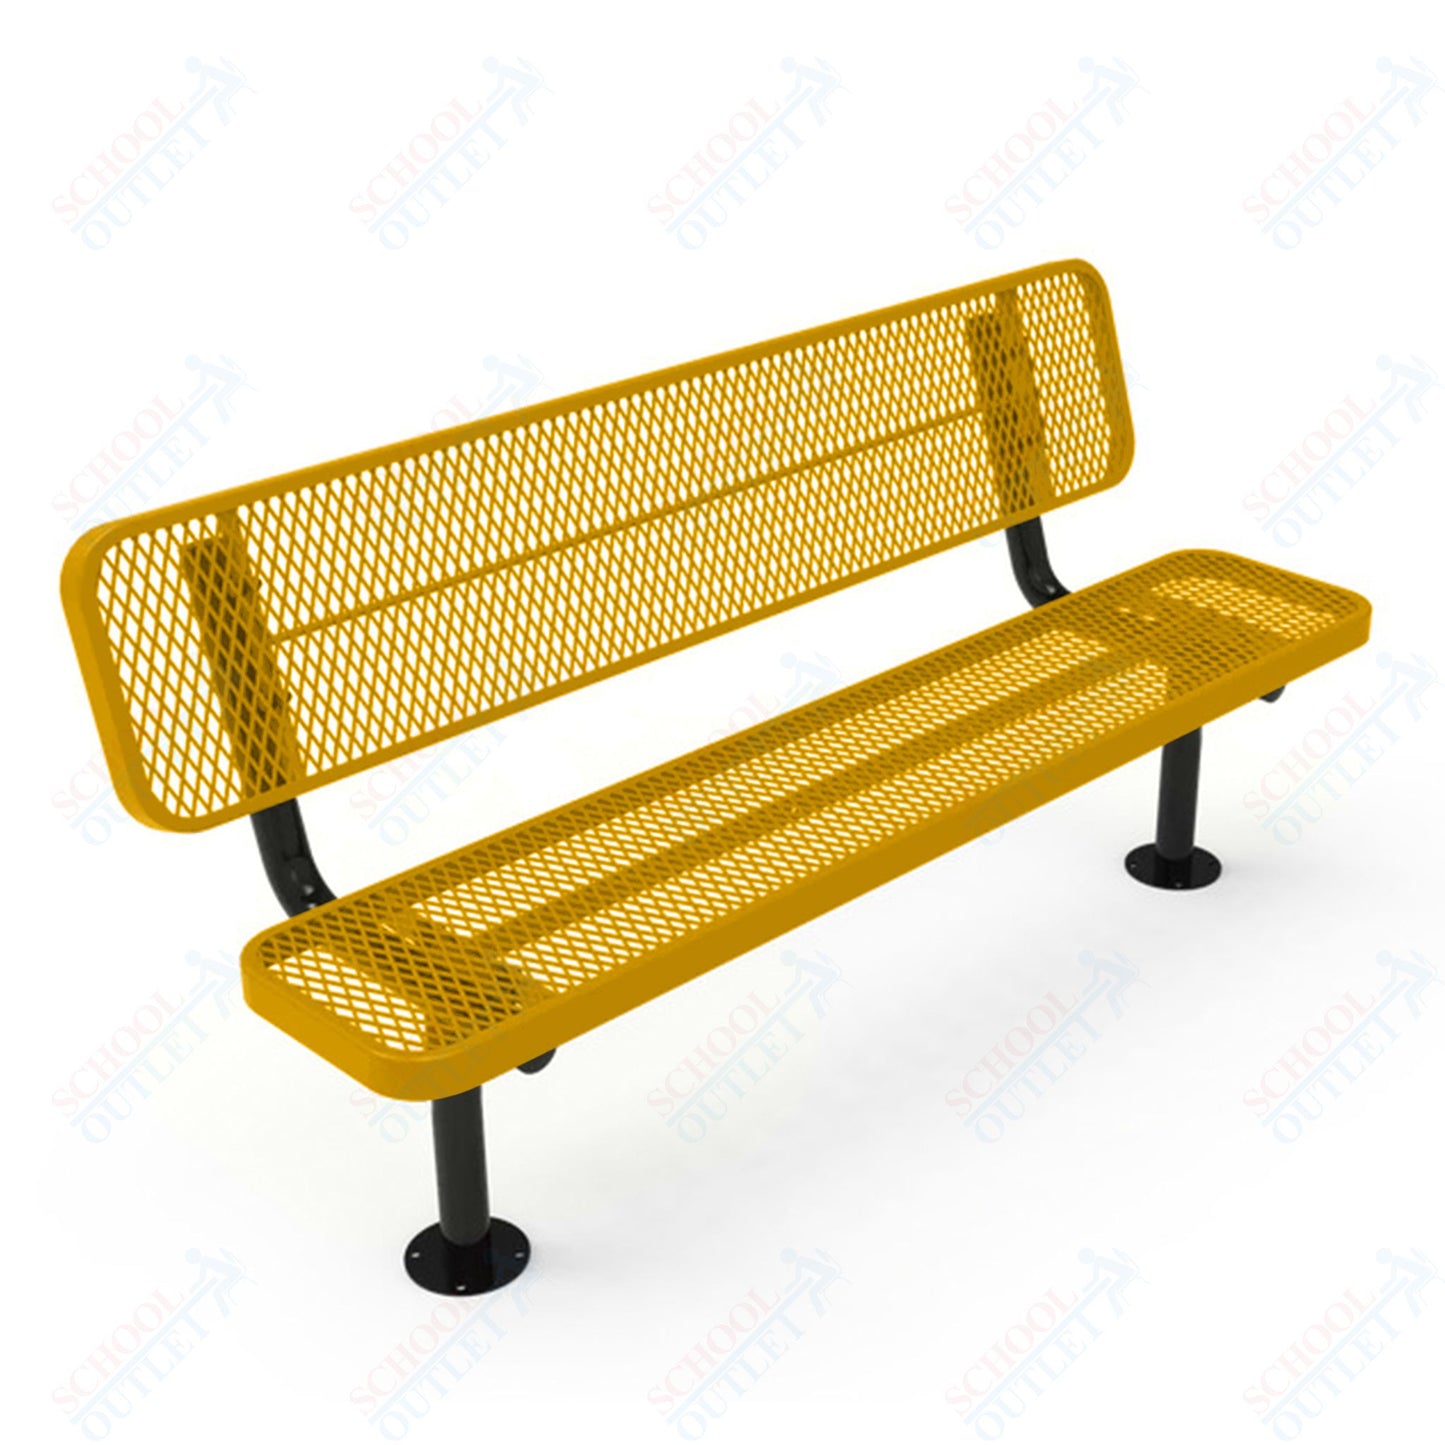 MyTcoat - Player's Outdoor Bench with Back - Surface Mount 8' L (MYT-BPY08-32)